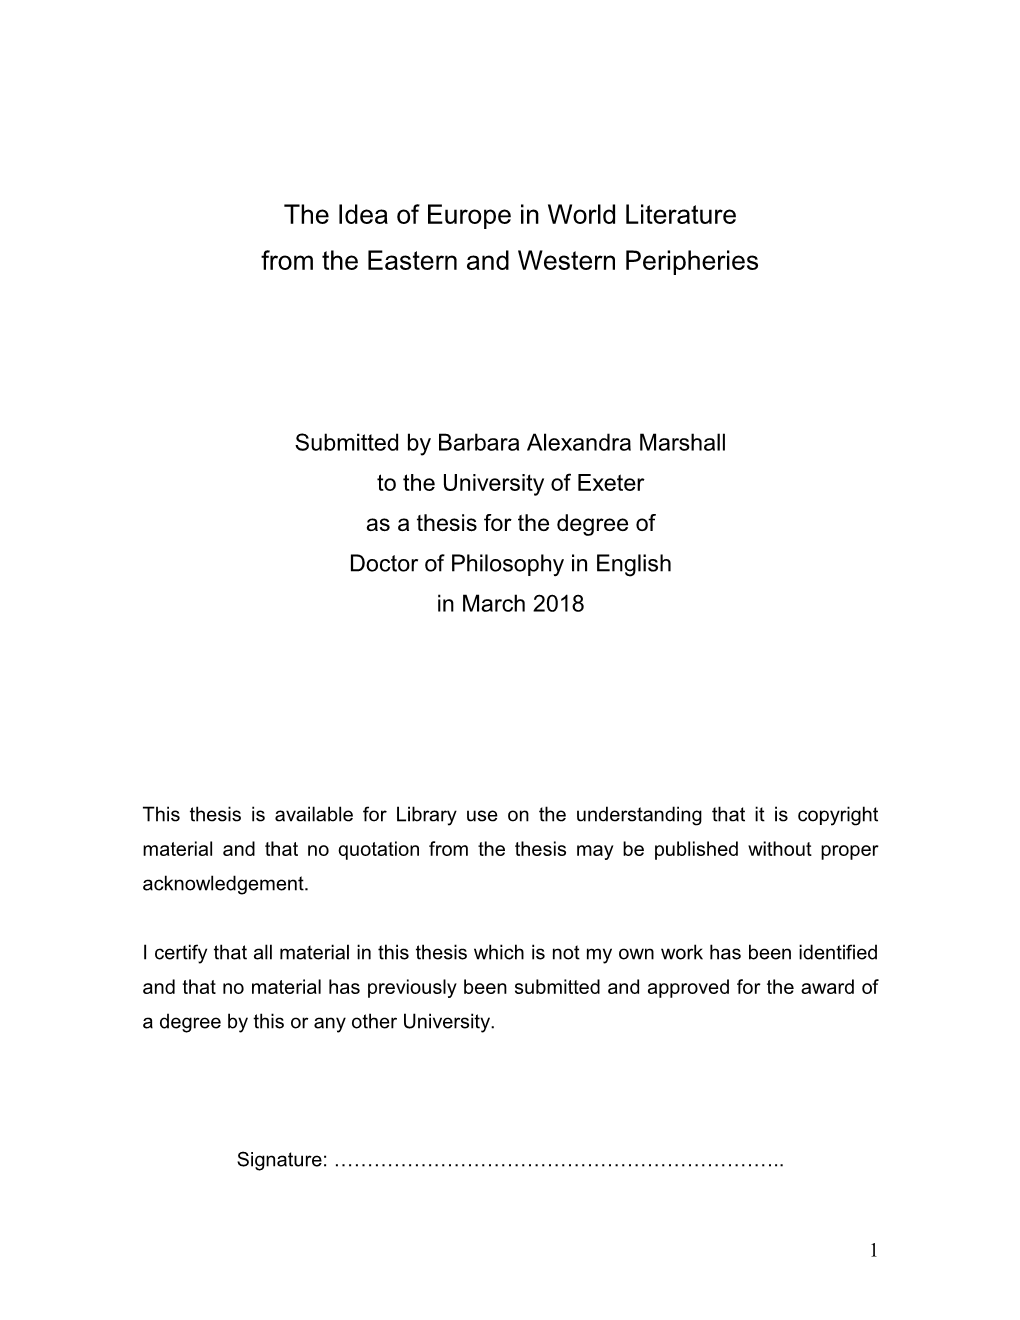 The Idea of Europe in World Literature from the Eastern and Western Peripheries